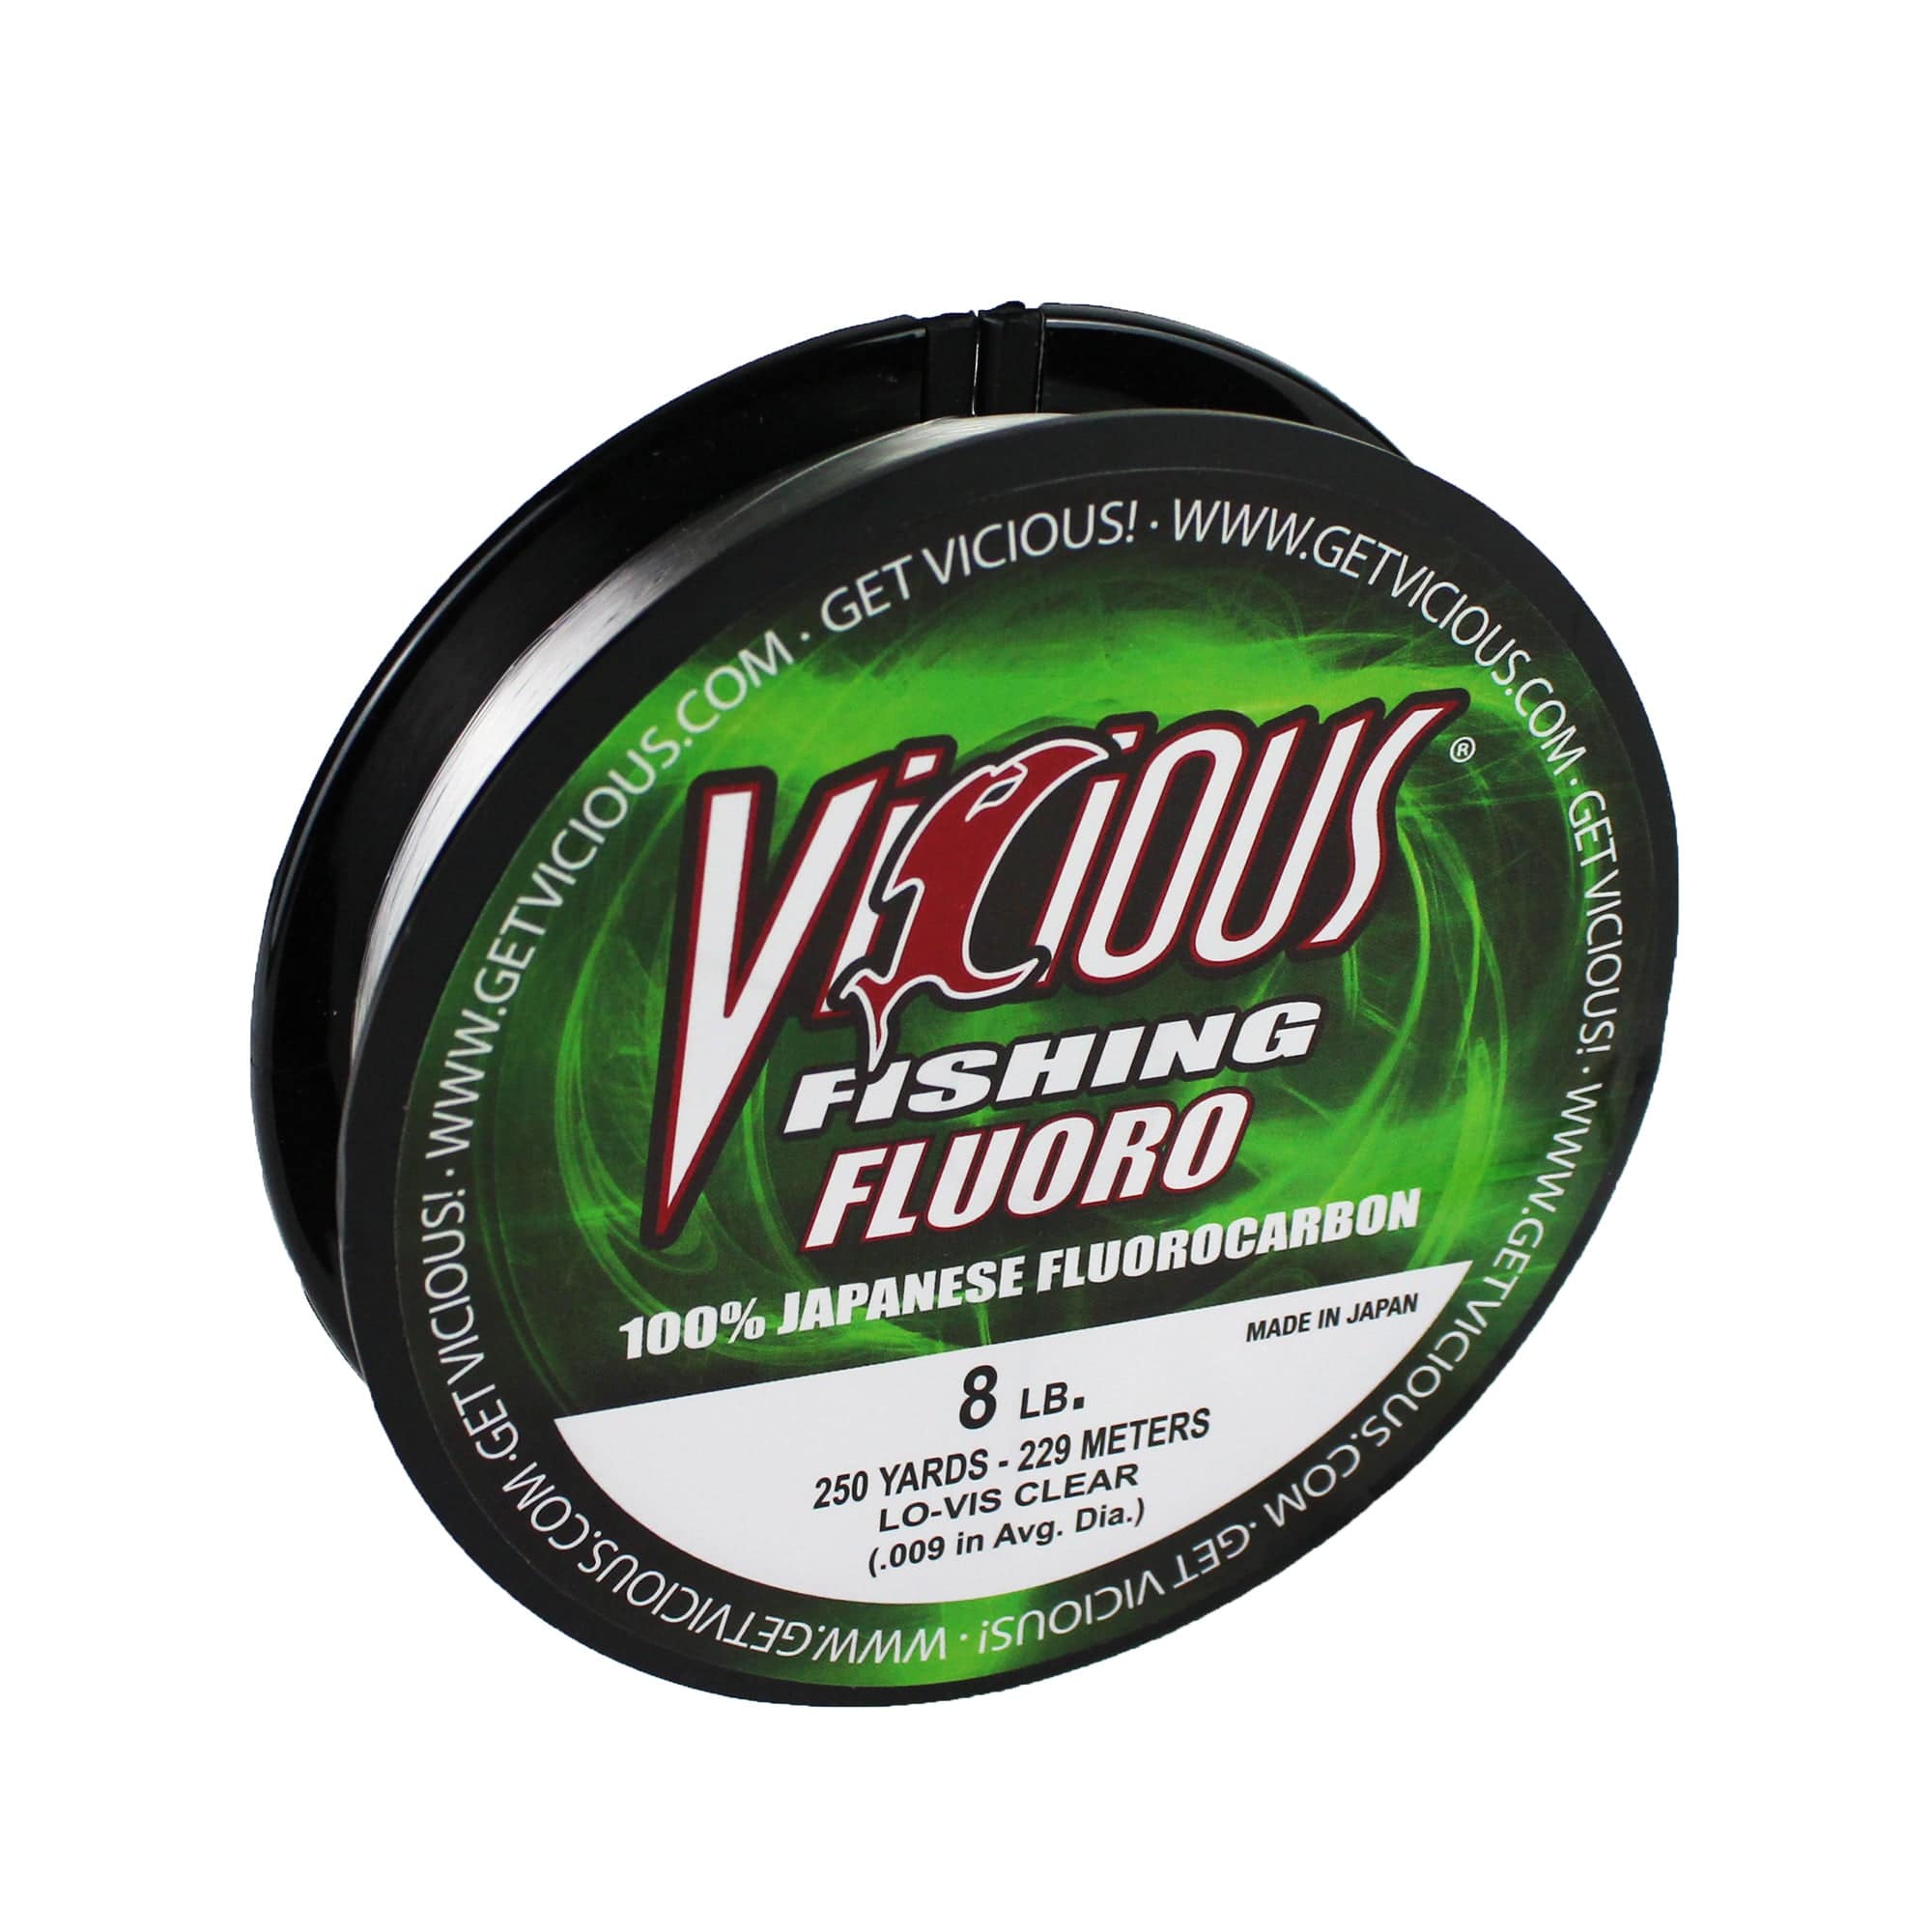 Vicious Fishing Fluorocarbon Fishing Line – 250yds Clear